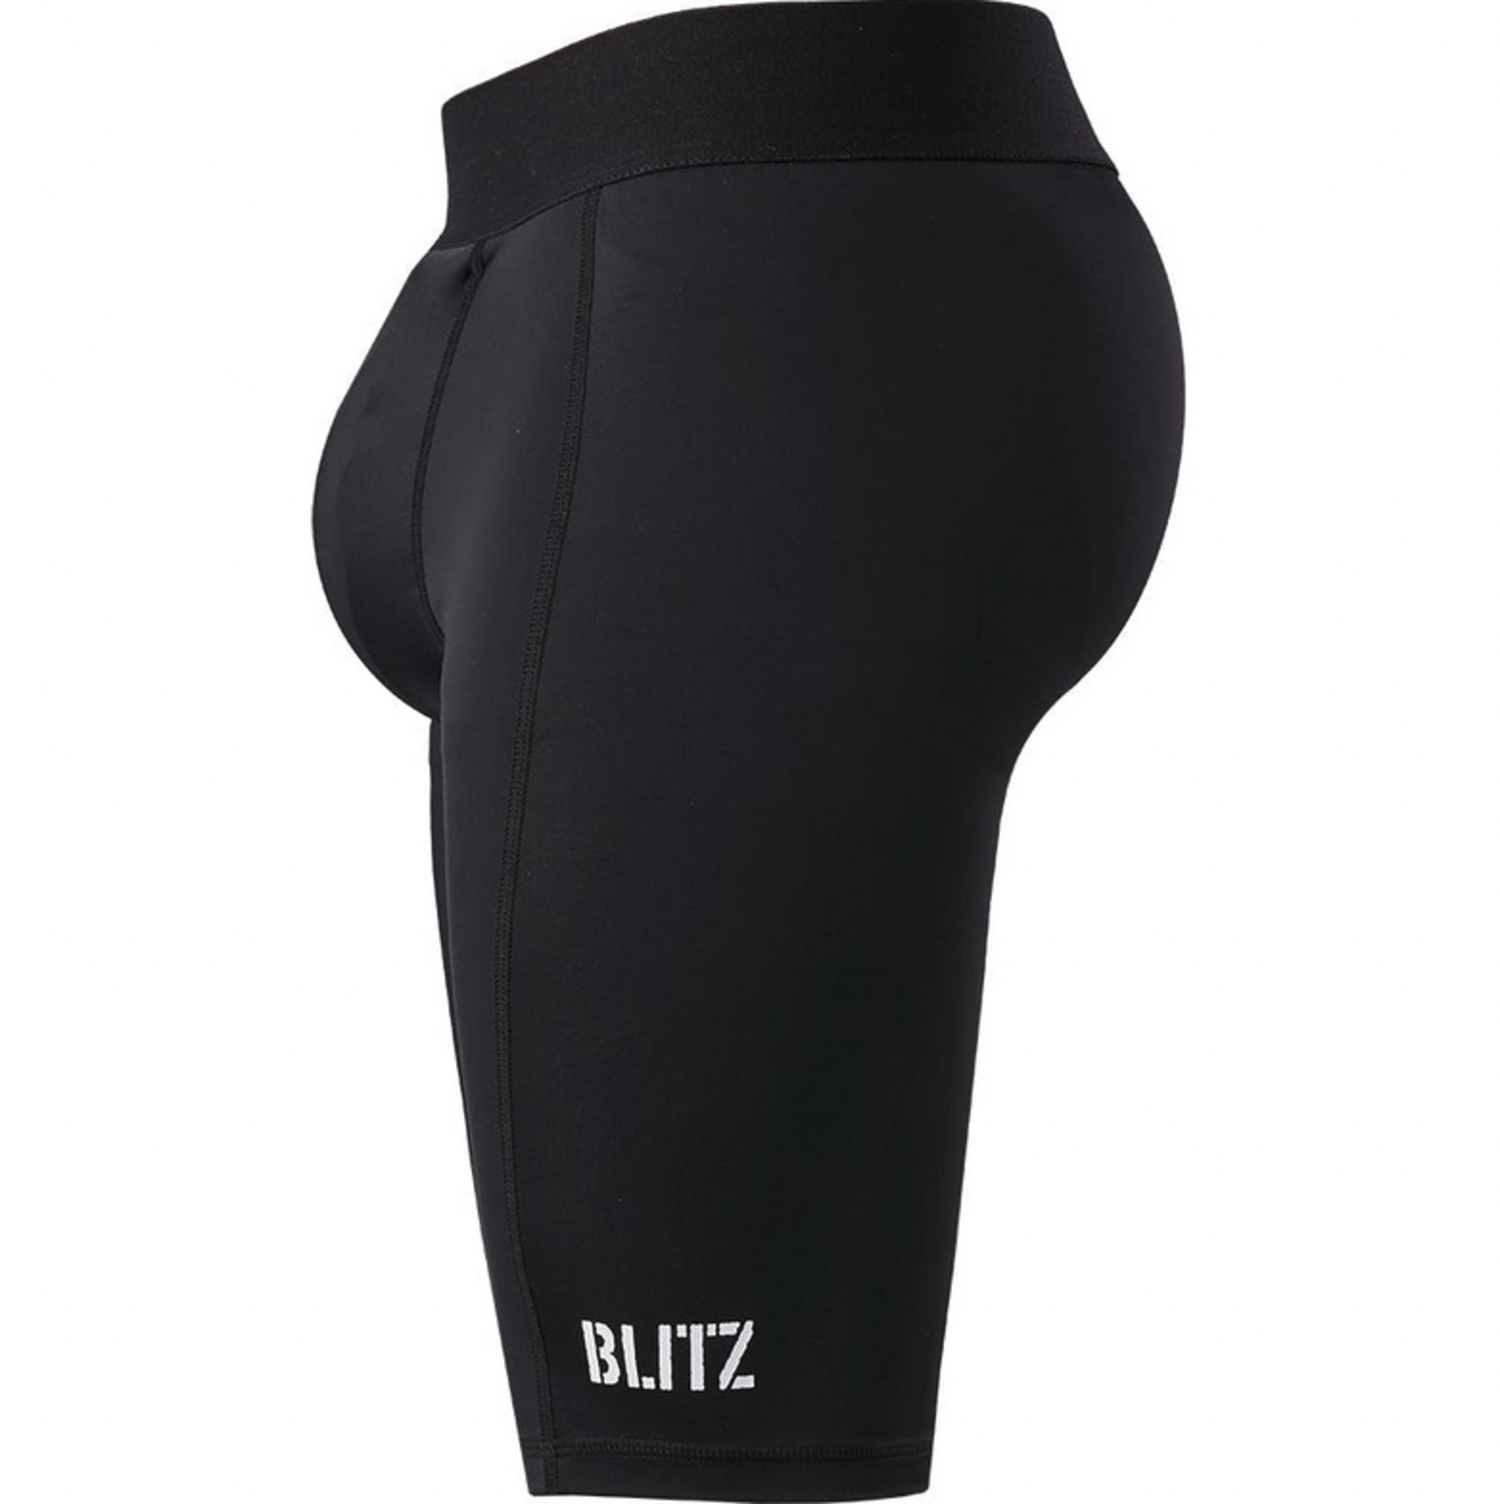 Compression Shorts With Groin Guard Cup - Enso Martial Arts Shop